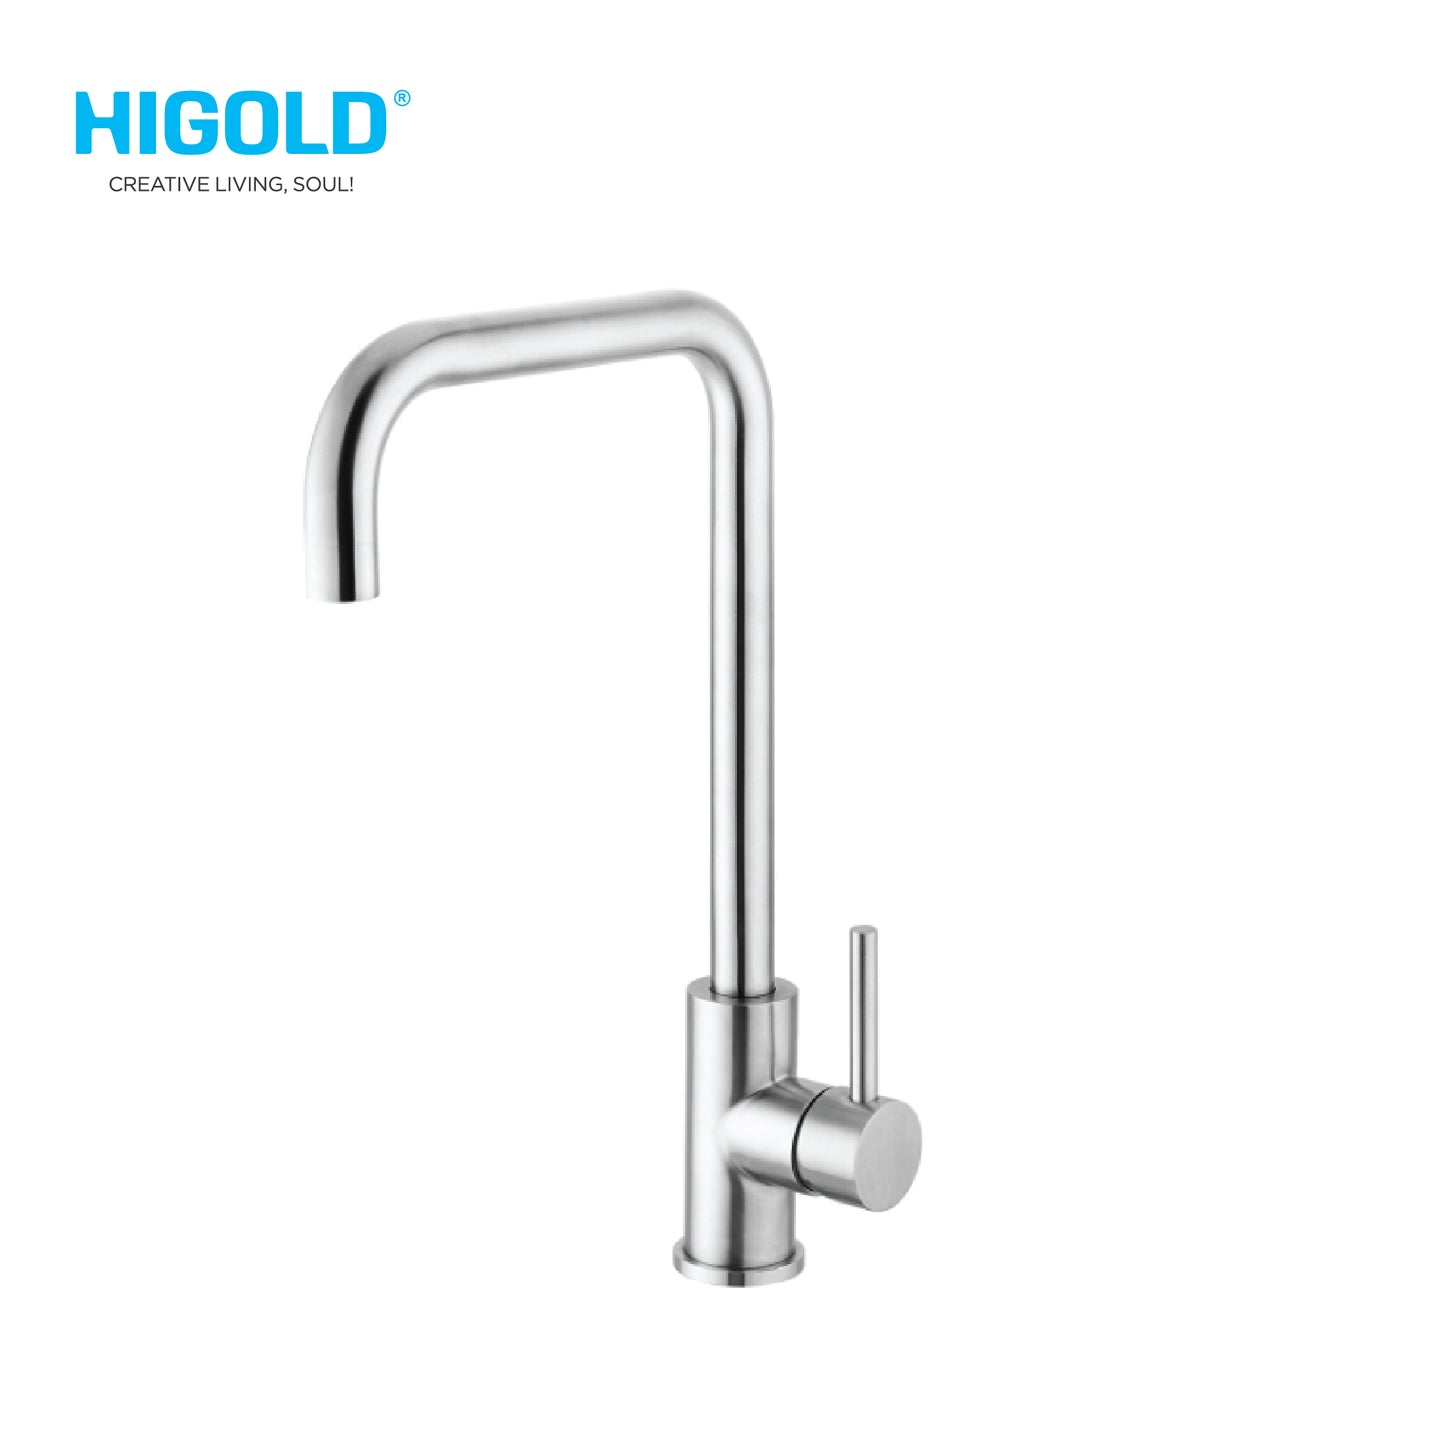 Higold Kitchen Faucet Cold & Hot With Mingdi Cartridge Dimension 190x337mm Stainless Steel Finish - HG980104